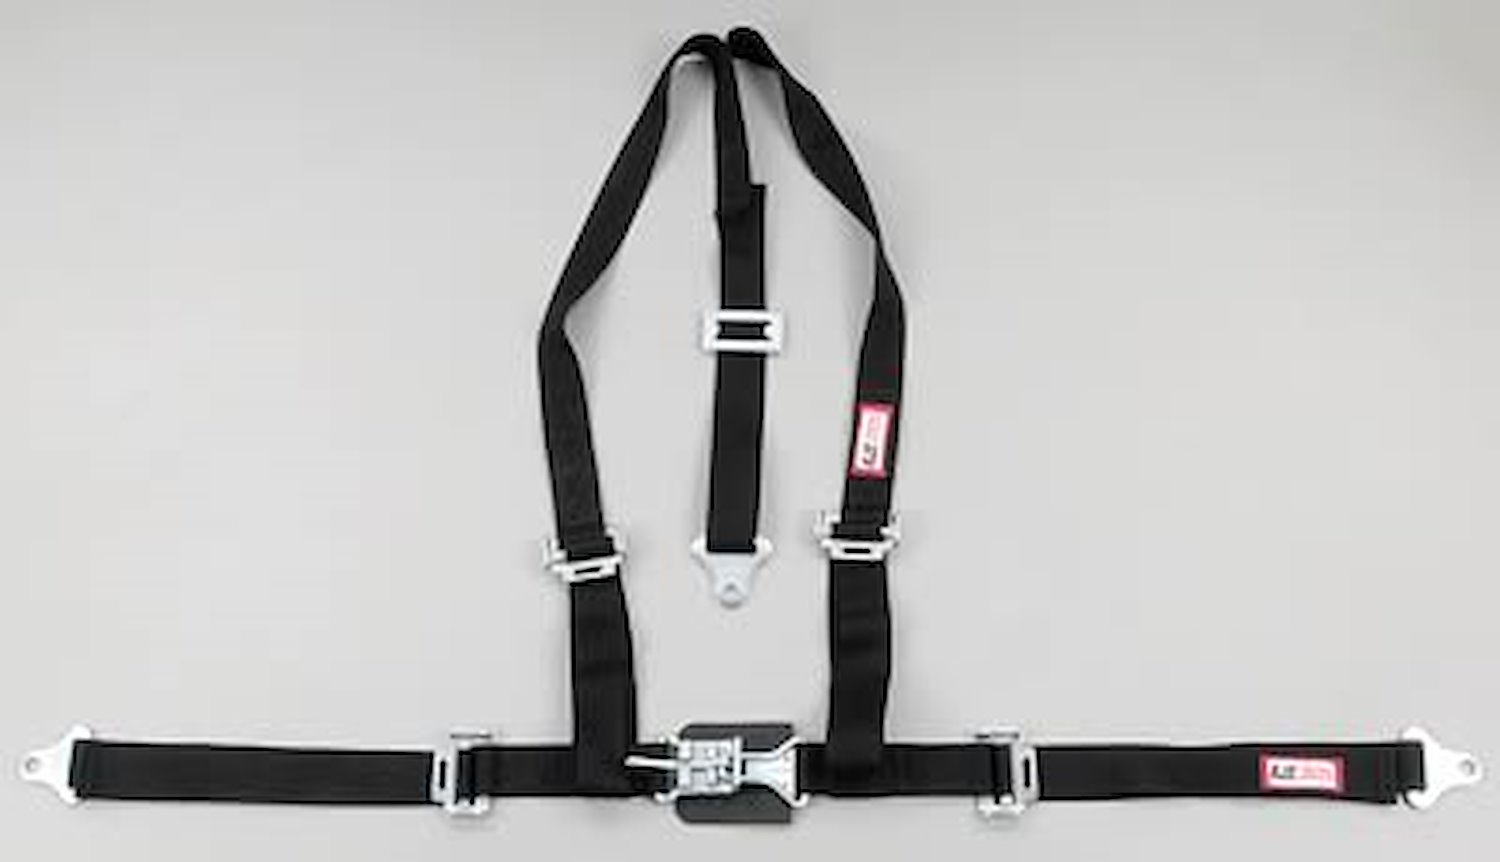 NON-SFI L&L HARNESS 2 PULL DOWN Lap Belt SNAP SEWN IN 2 S.H. Y FLOOR Mount WRAP/BOLT BLUE